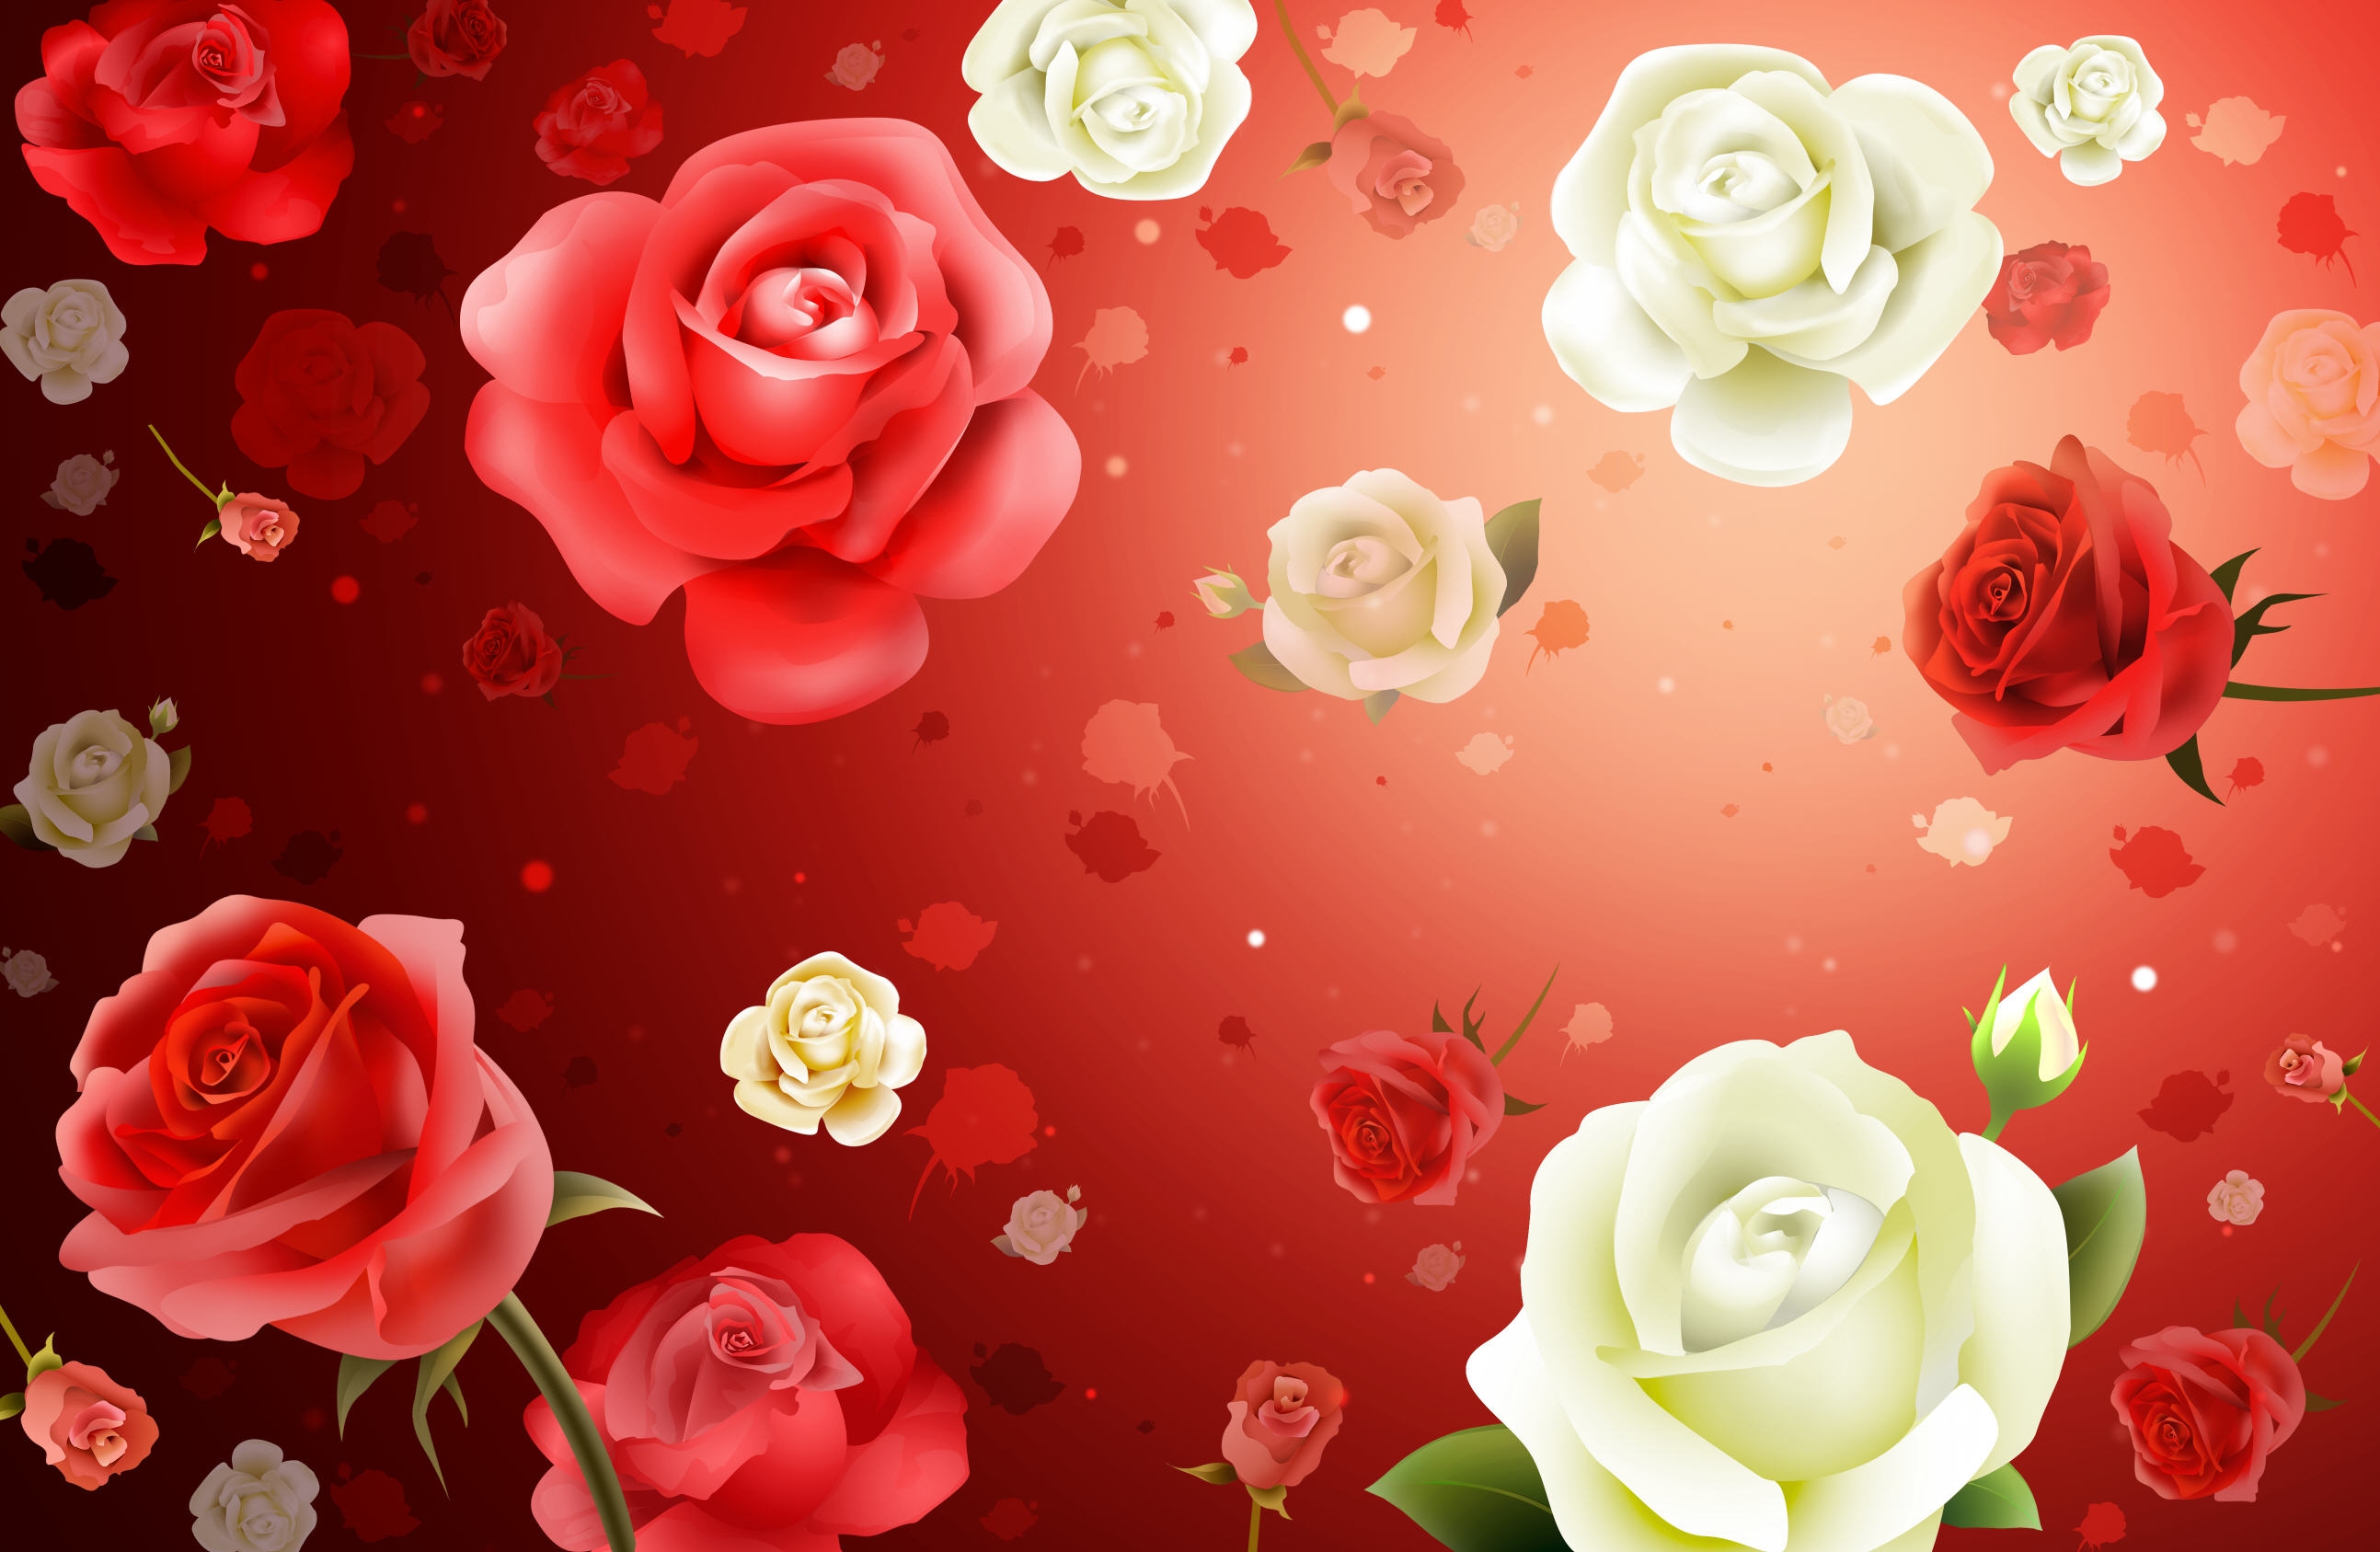 flowers, background, roses, texture, textures lock screen backgrounds